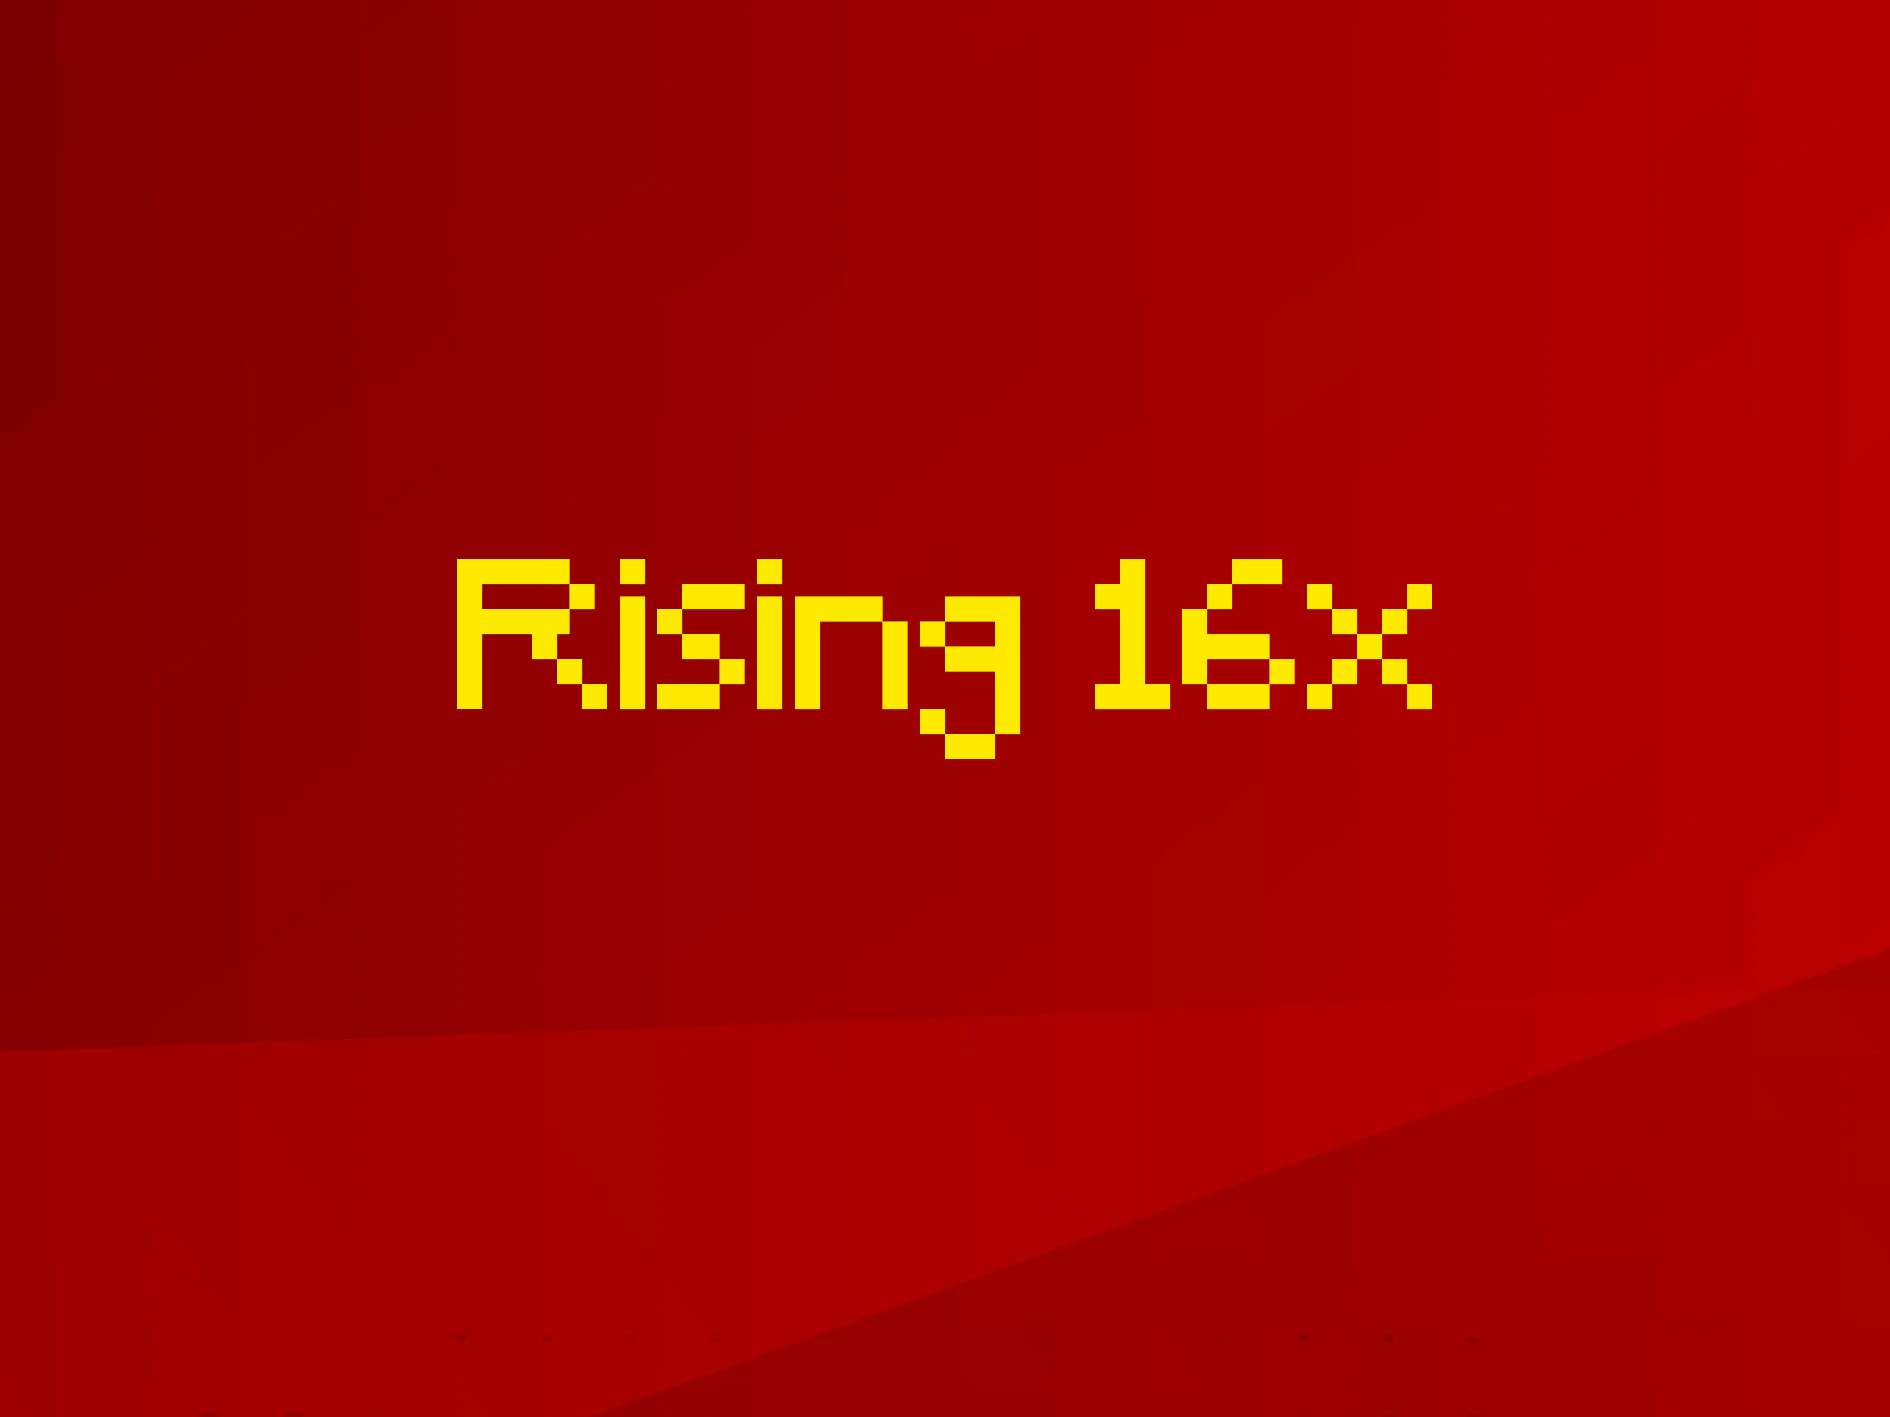 Rising  16 by BeastBlazeInd on PvPRP